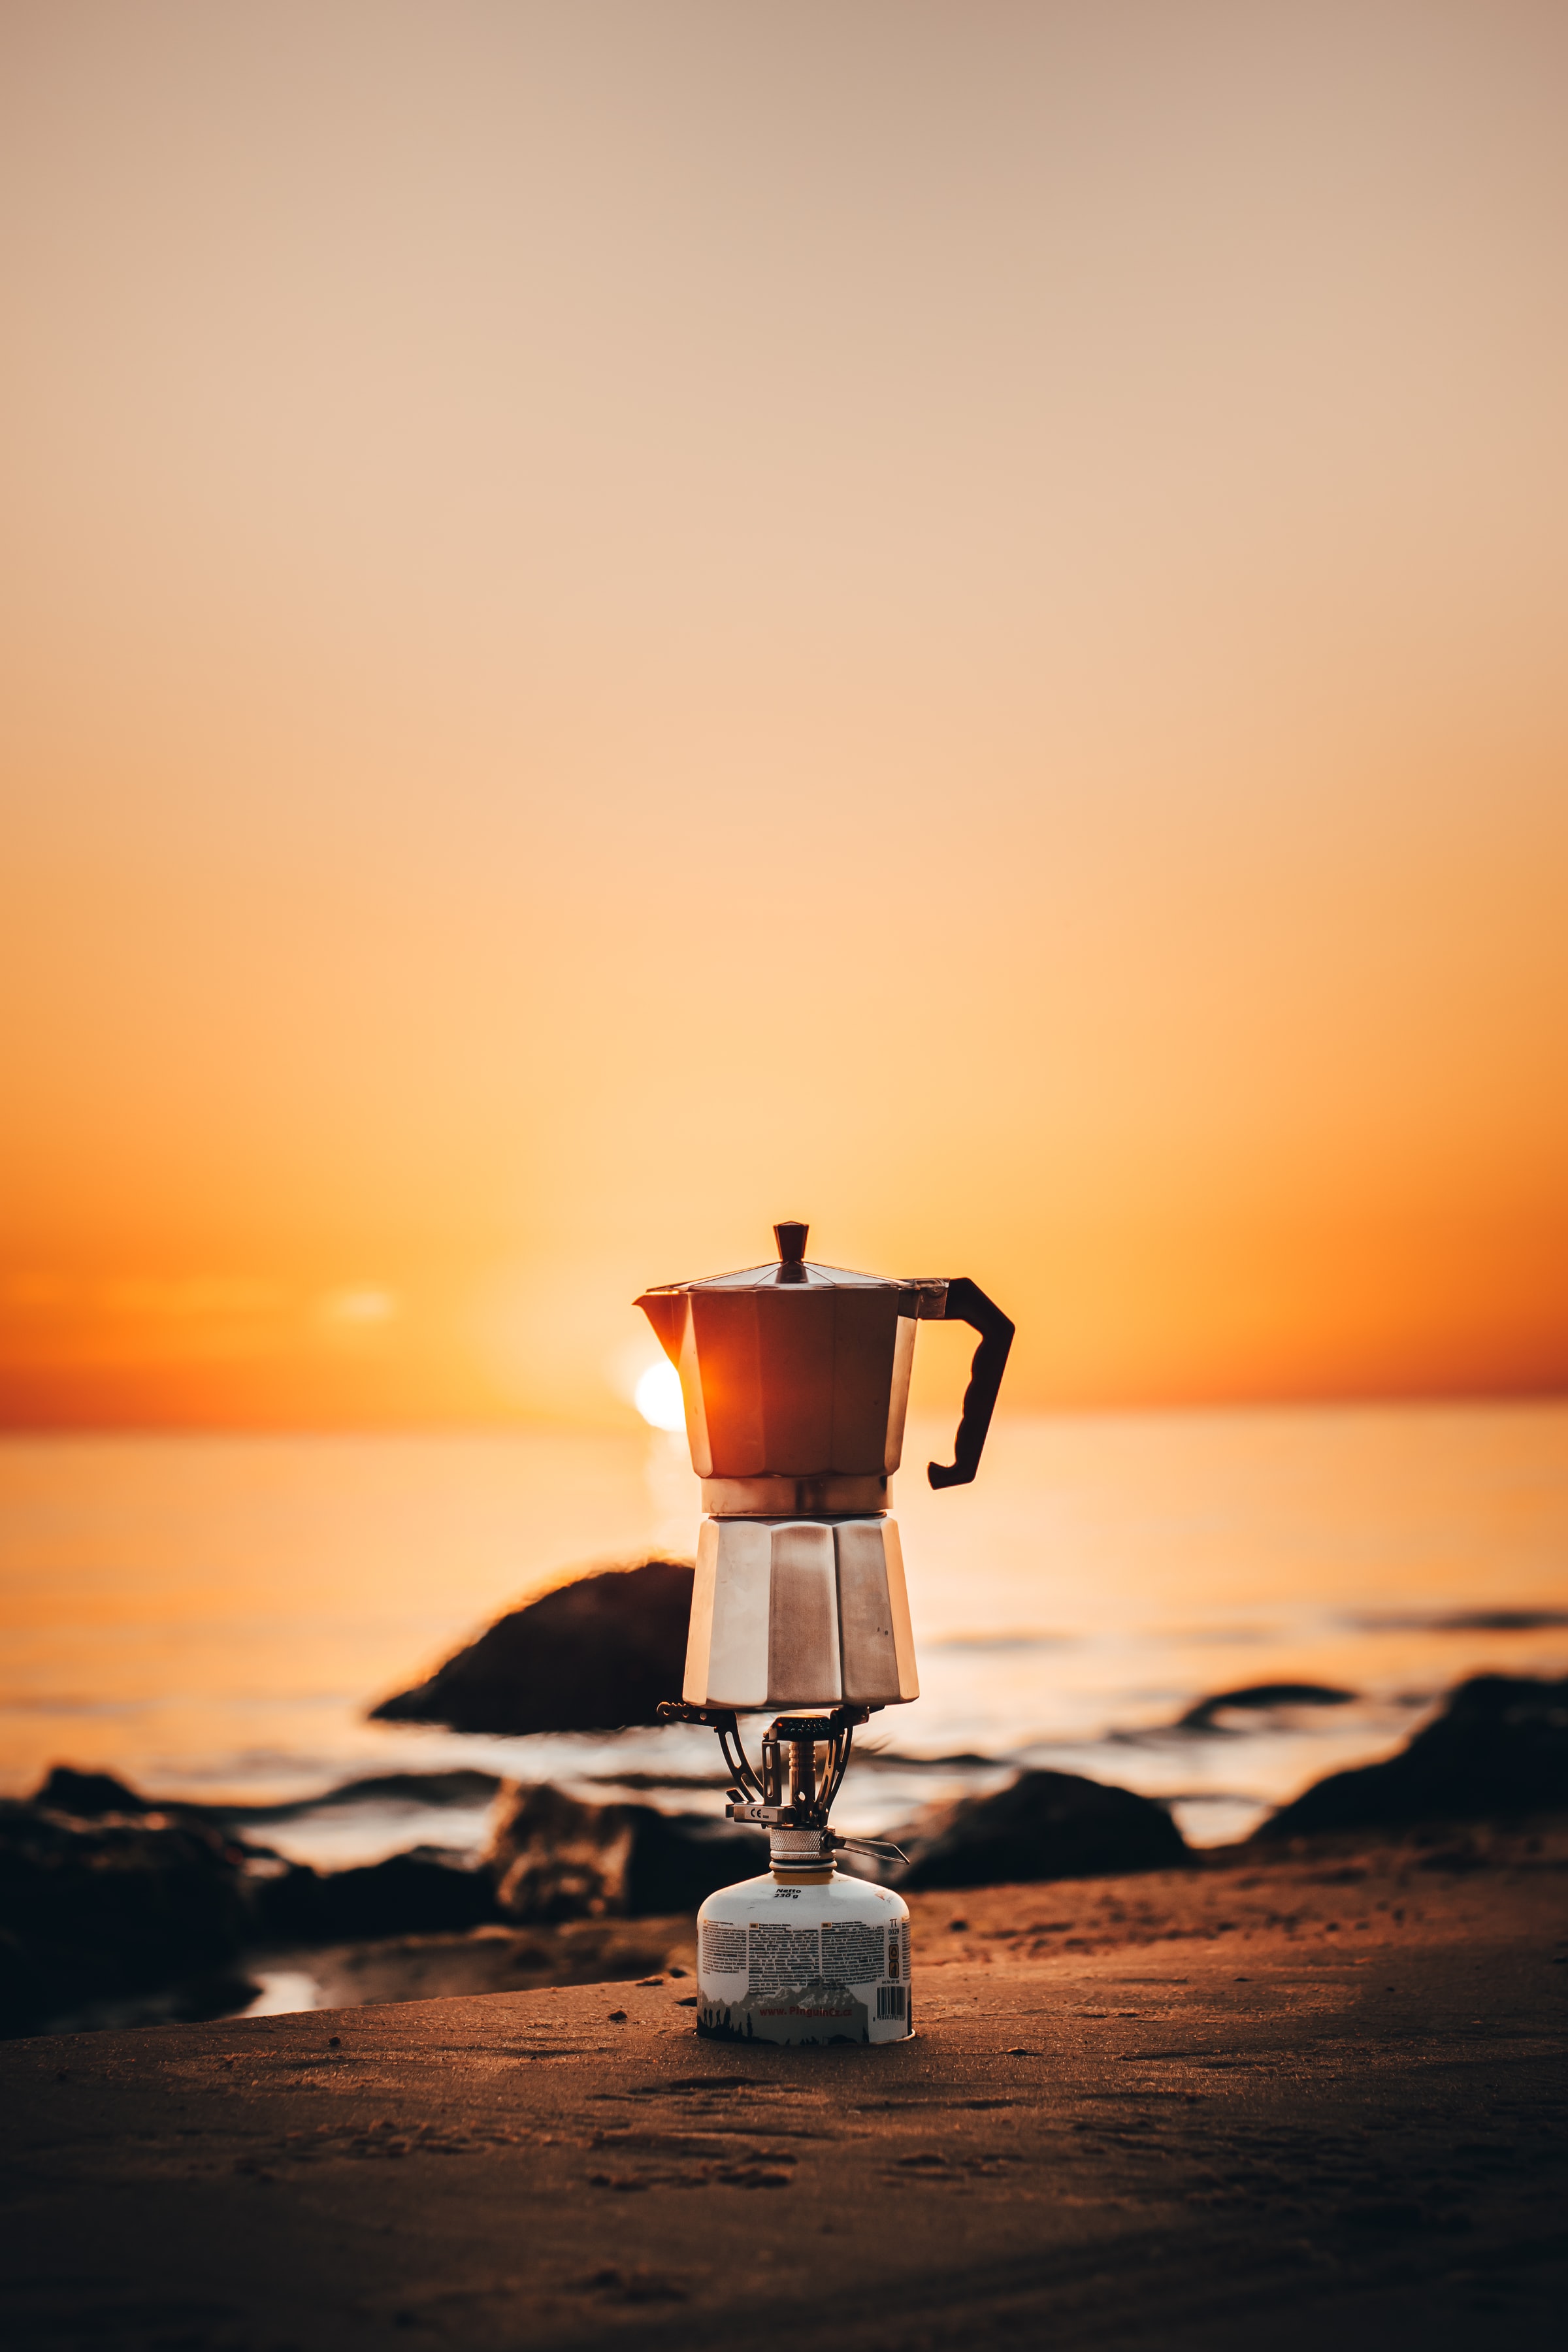 100845 Screensavers and Wallpapers Teapot for phone. Download sunset, rocks, miscellanea, miscellaneous, teapot, kettle, camping, campsite, hike, campaign pictures for free